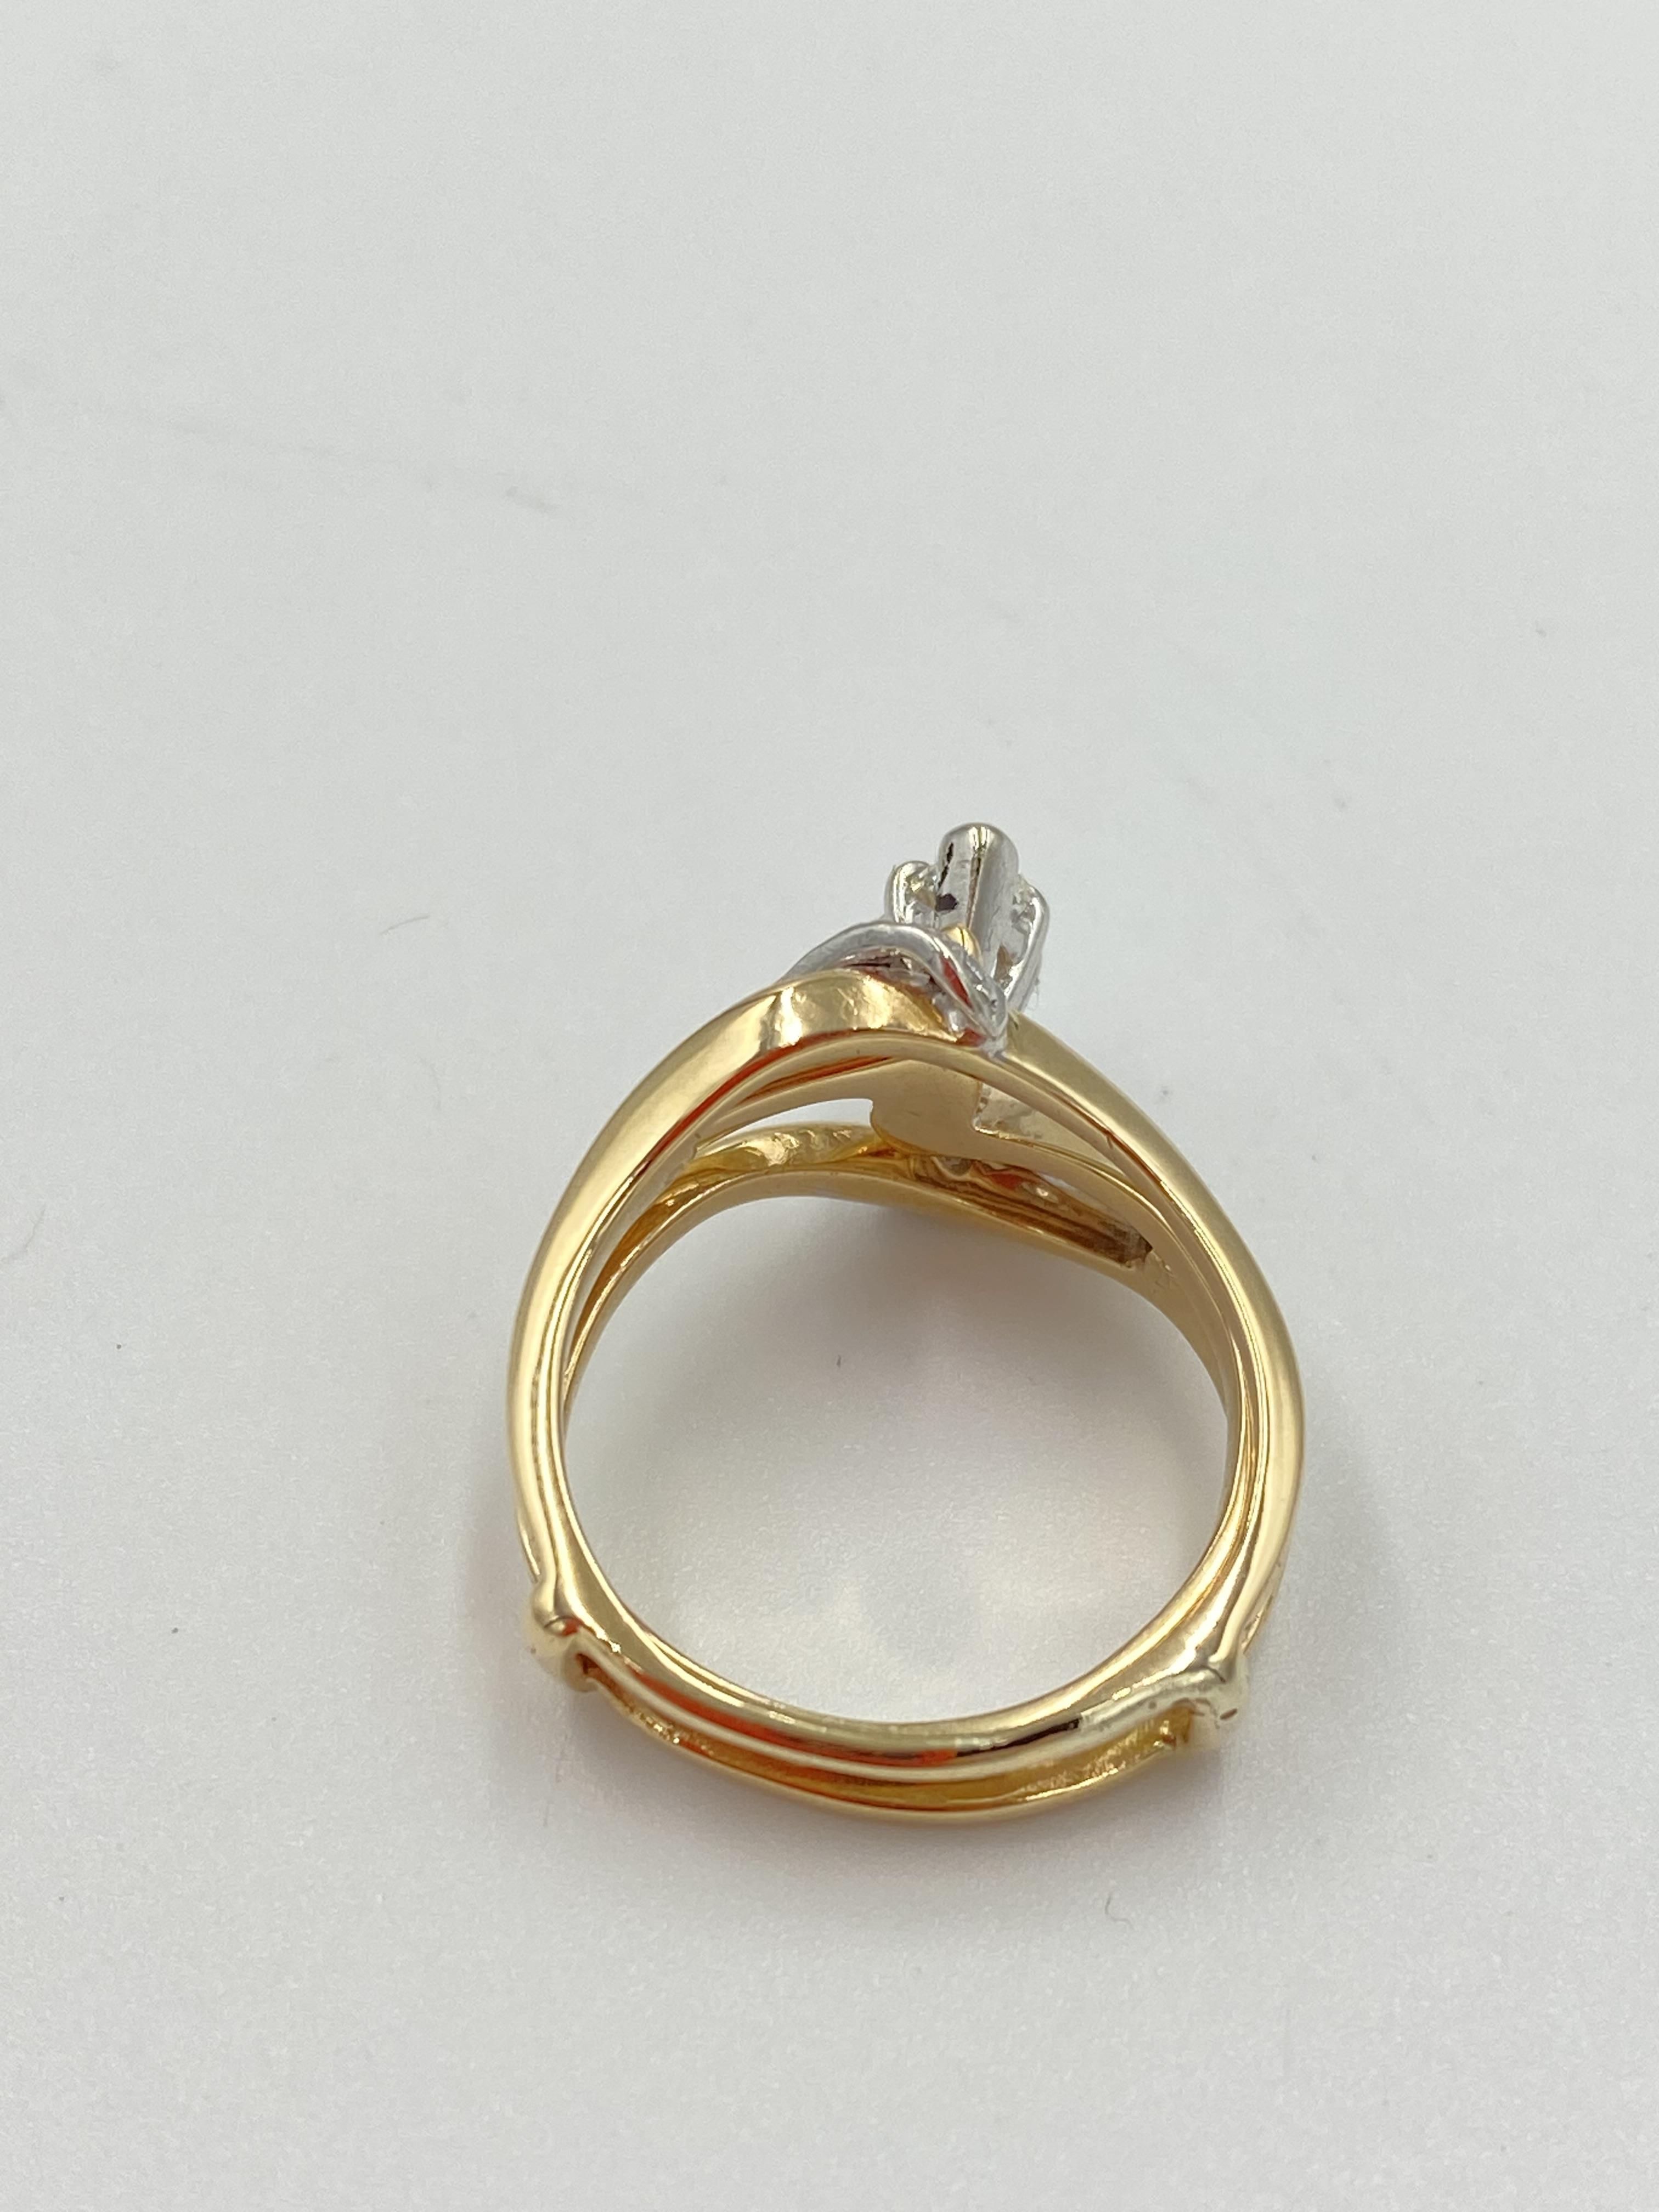 14ct gold and diamond ring - Image 4 of 6